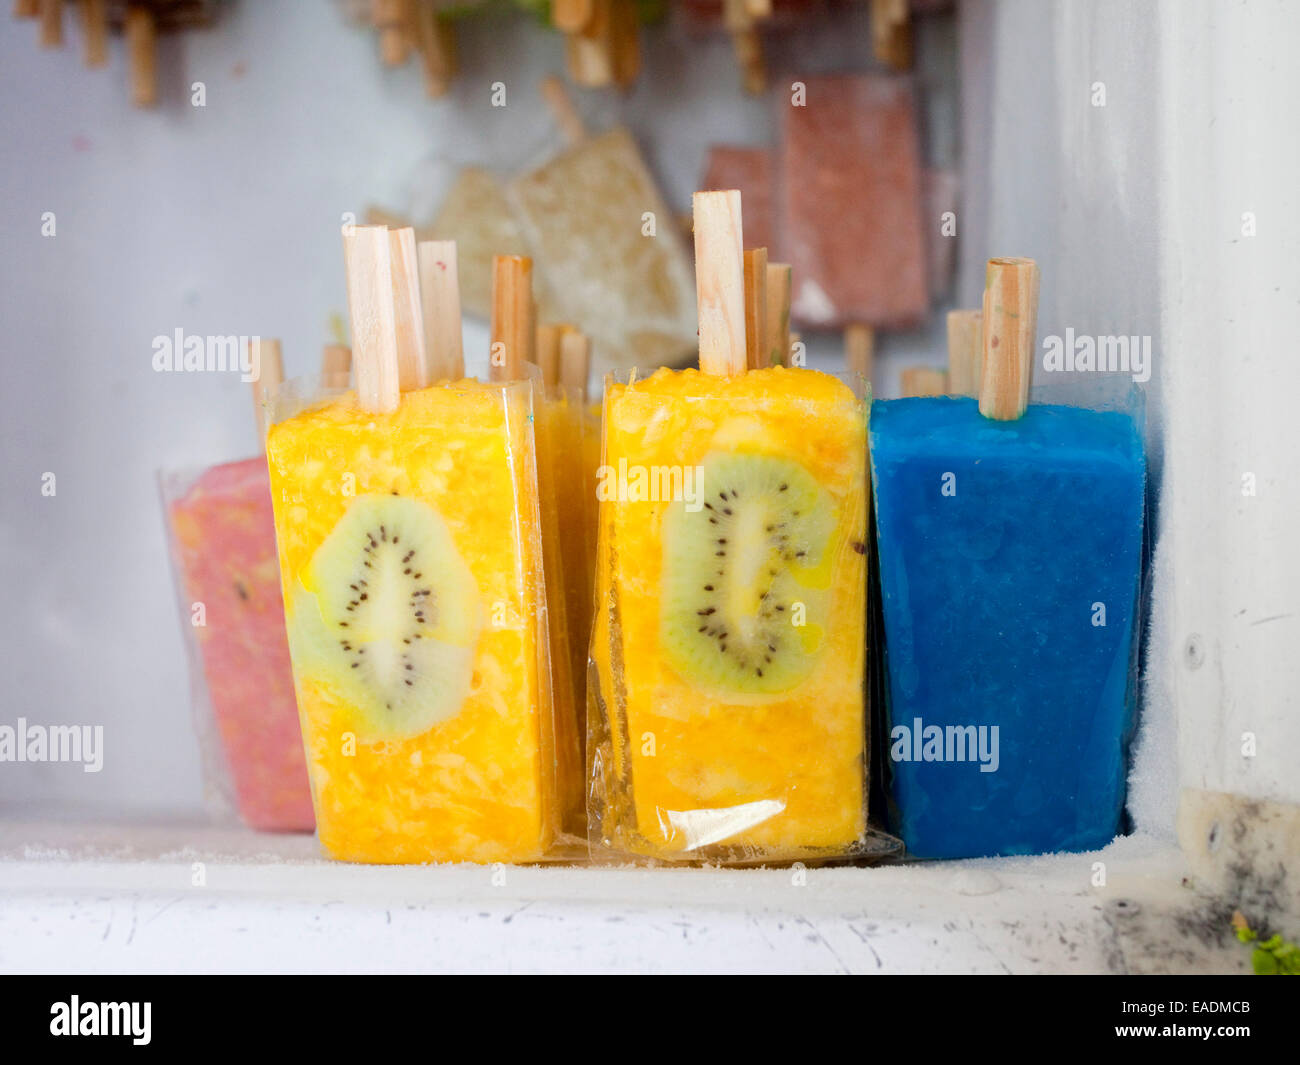 Brightly colored popsicles in freezer Stock Photo